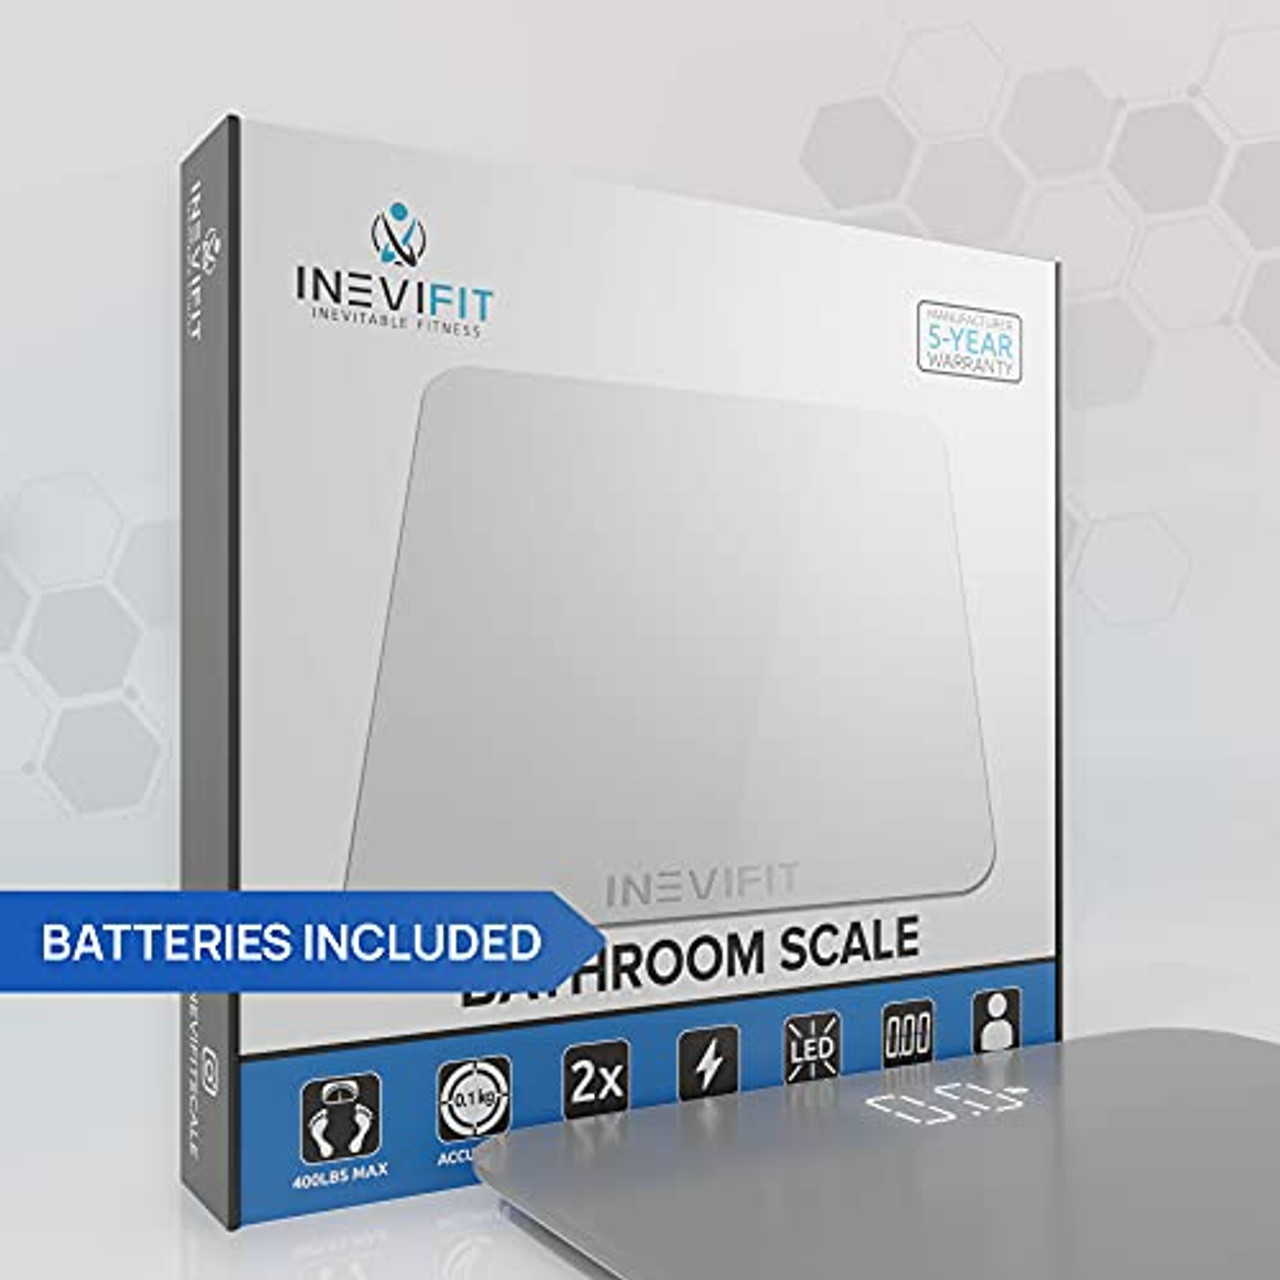 INEVIFIT Body Fat Scale, Highly Accurate Digital Bathroom Body